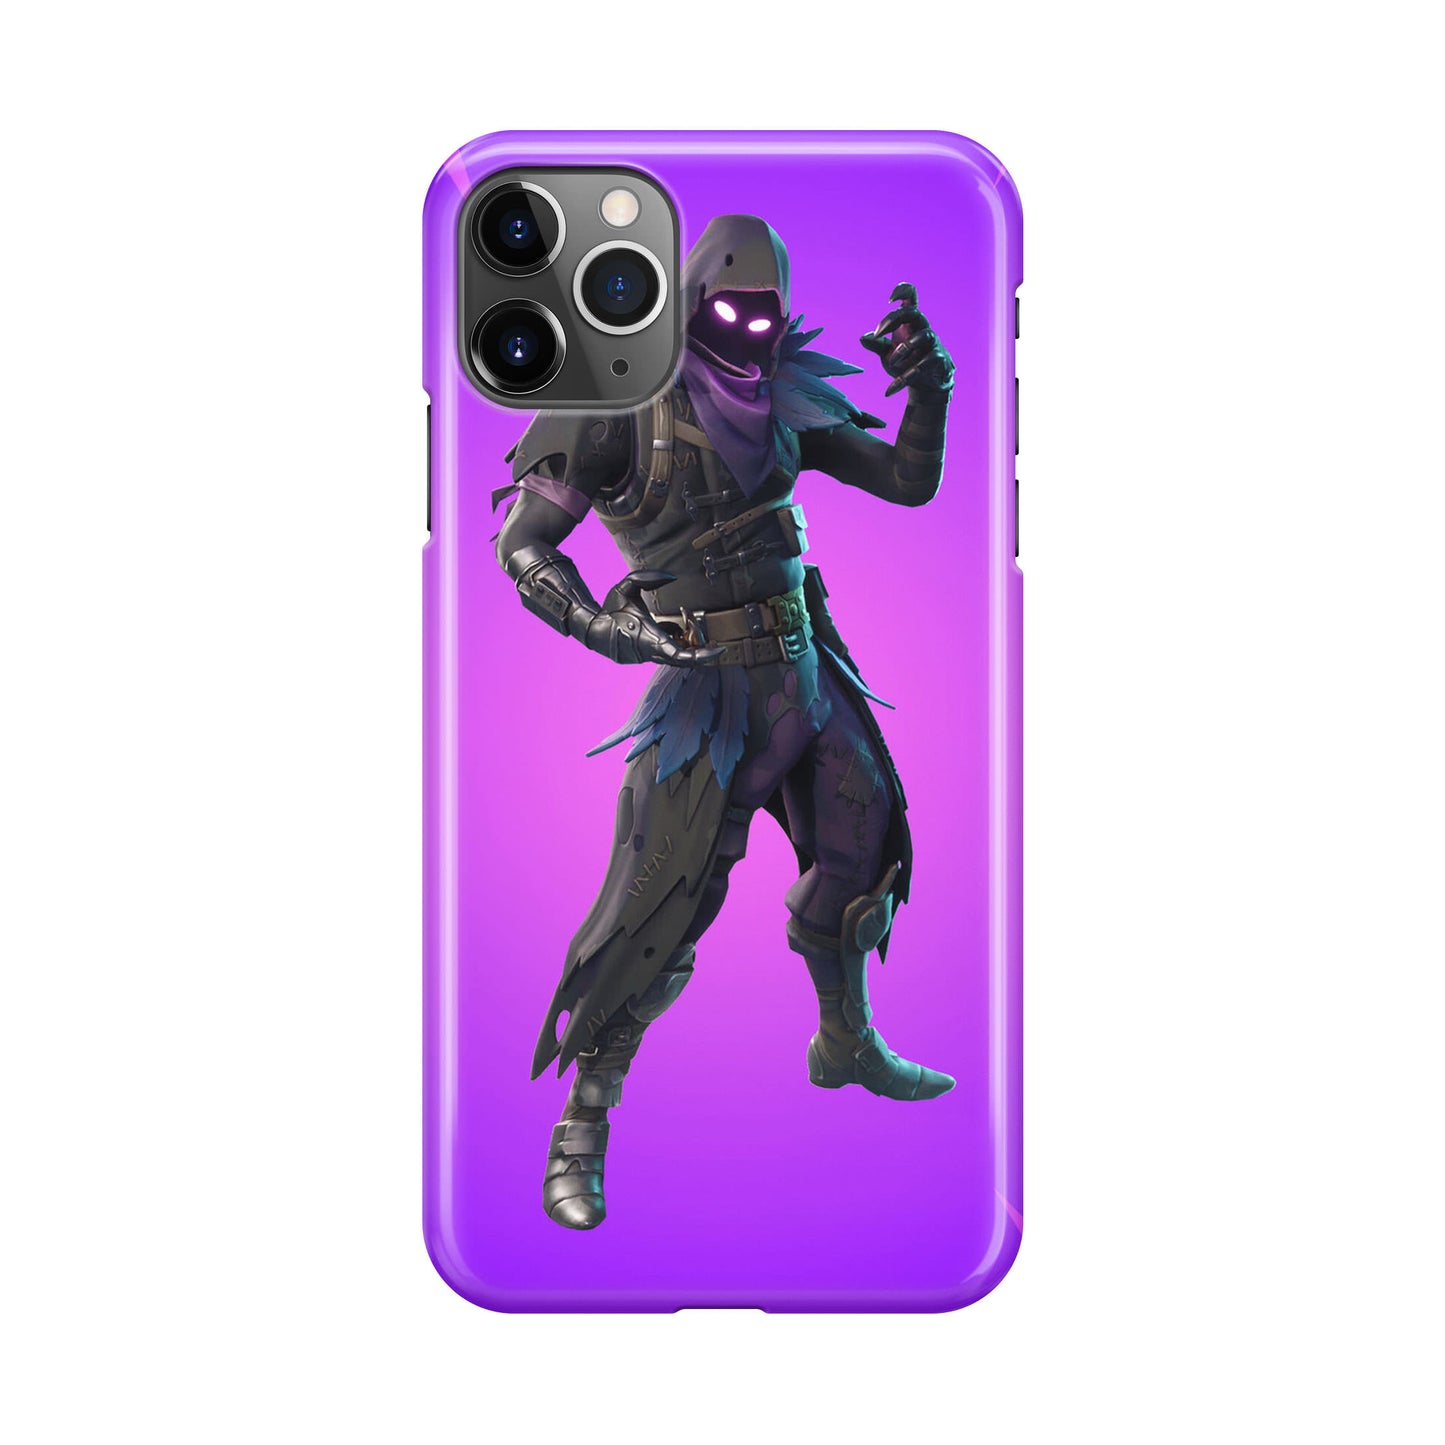 Raven The Legendary Outfit iPhone 11 Pro Max Case